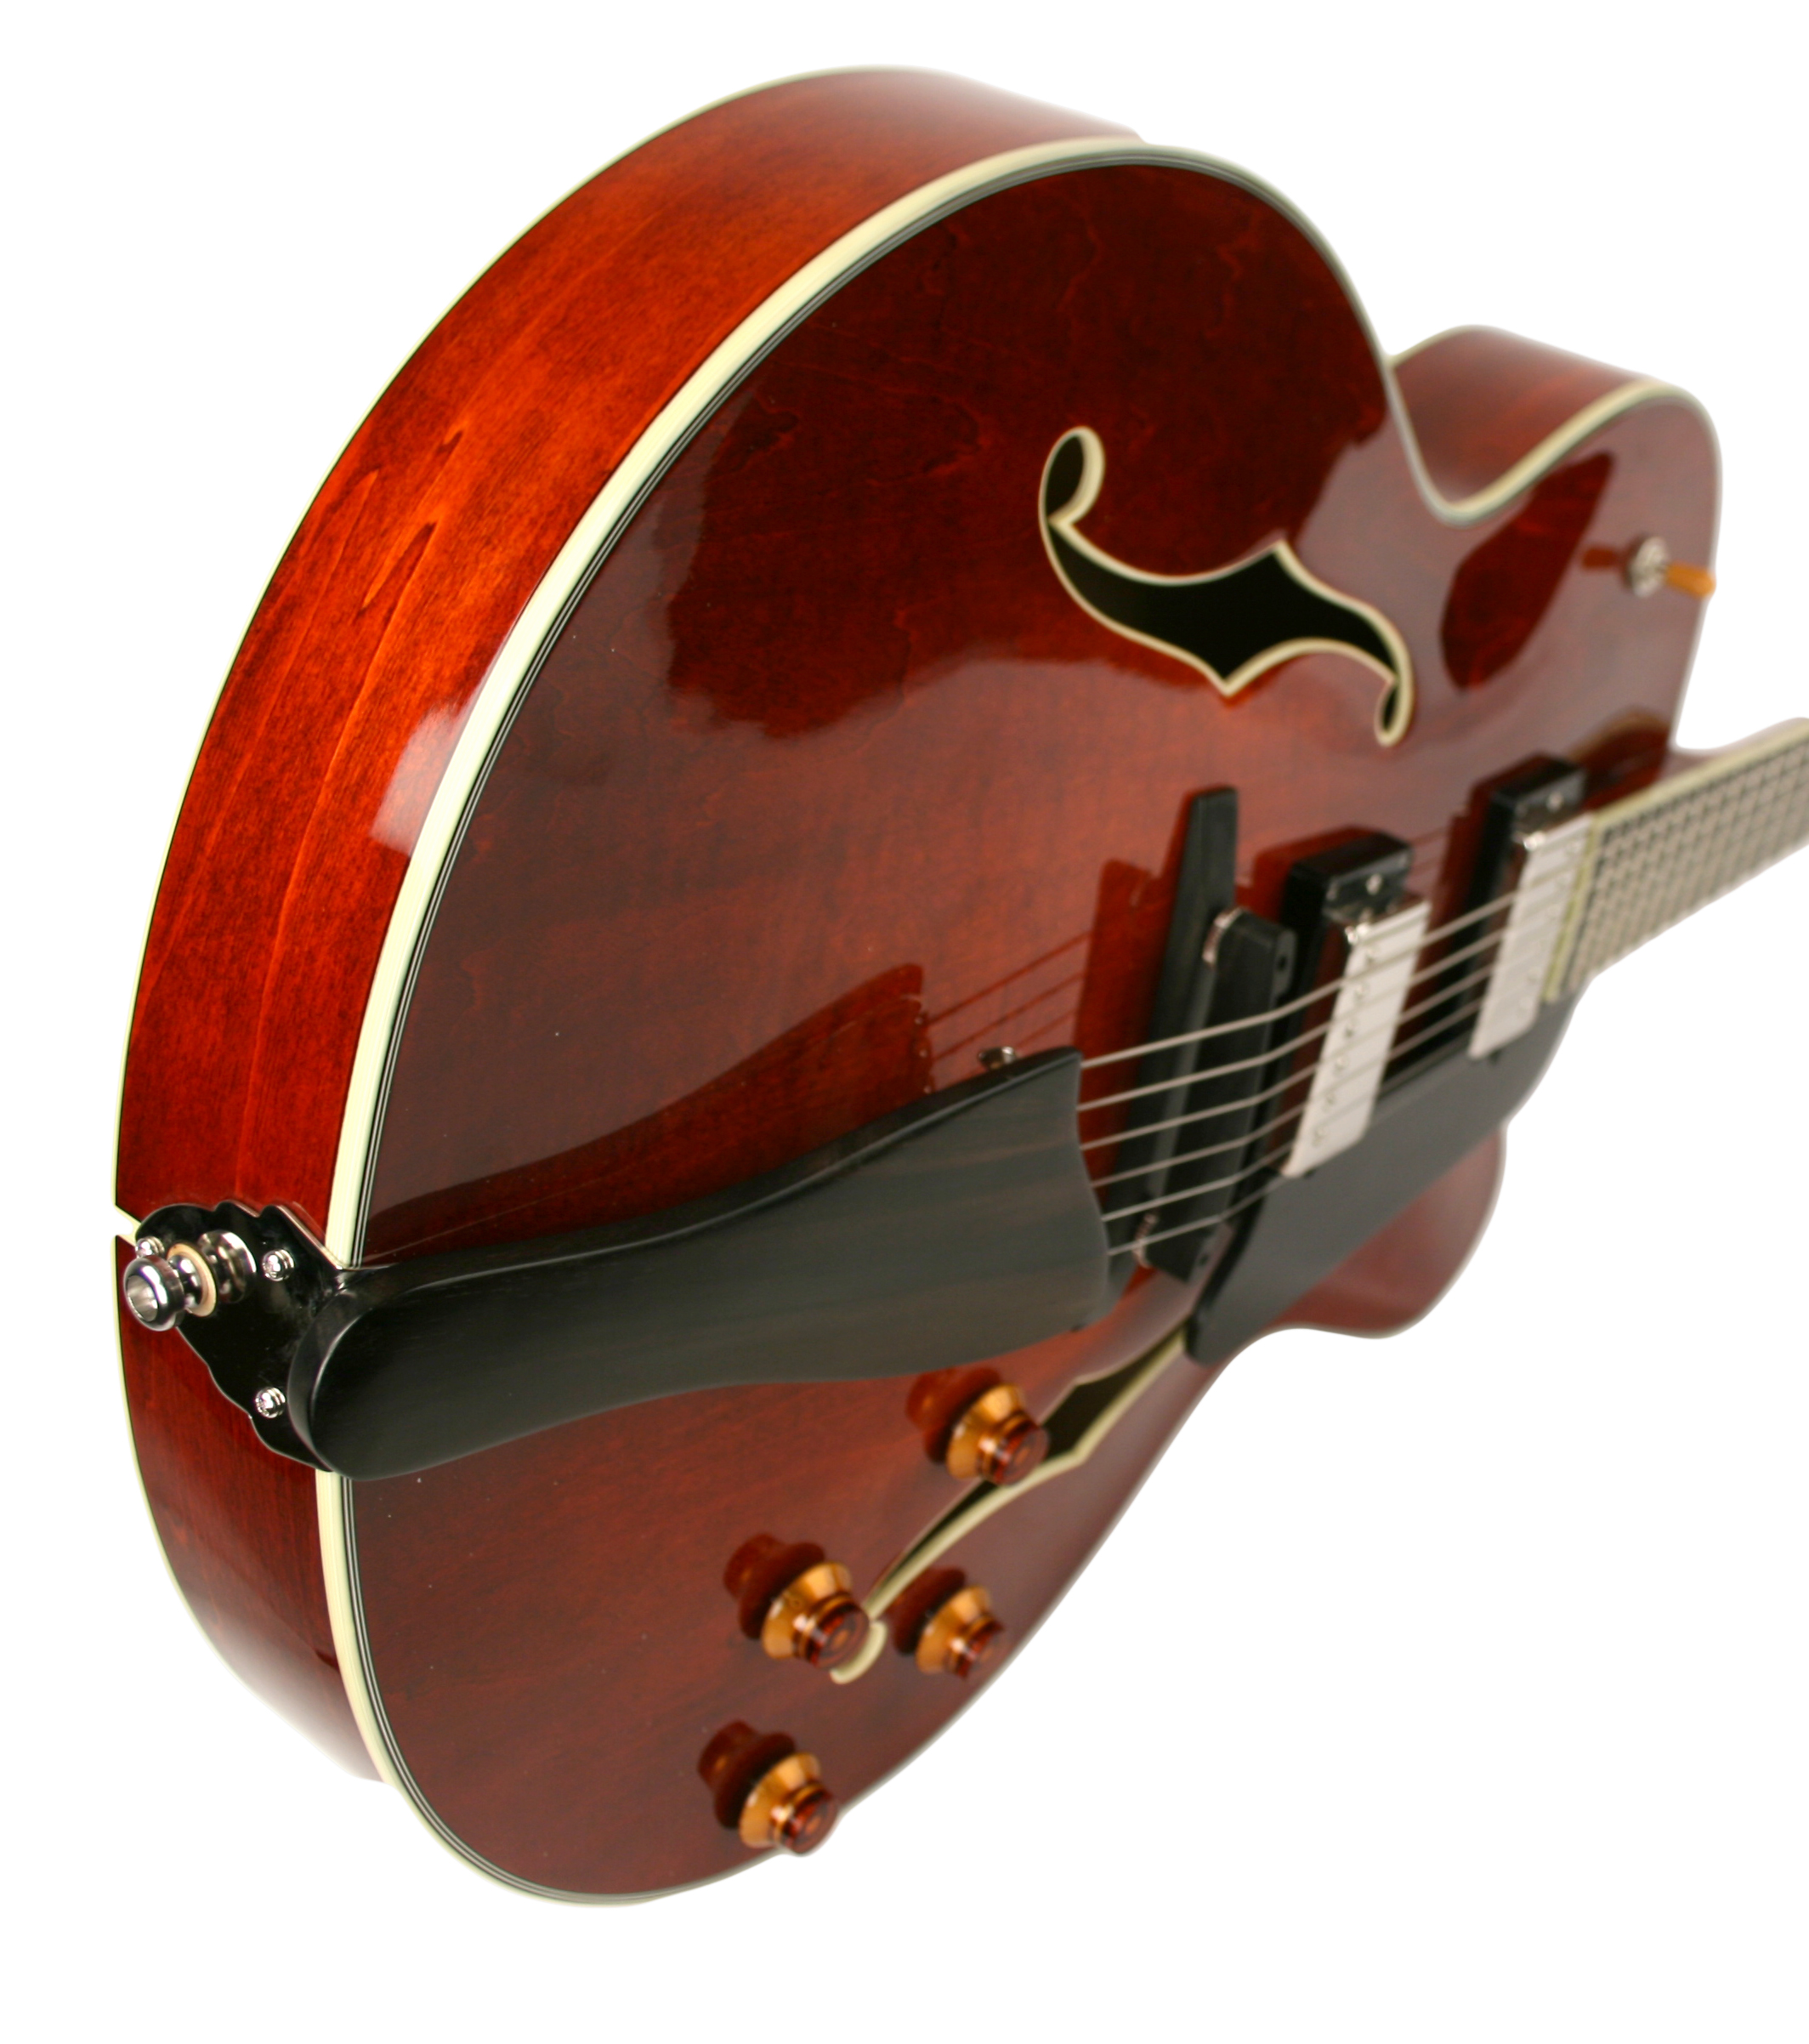 Eastman AR403CED Electric Archtop